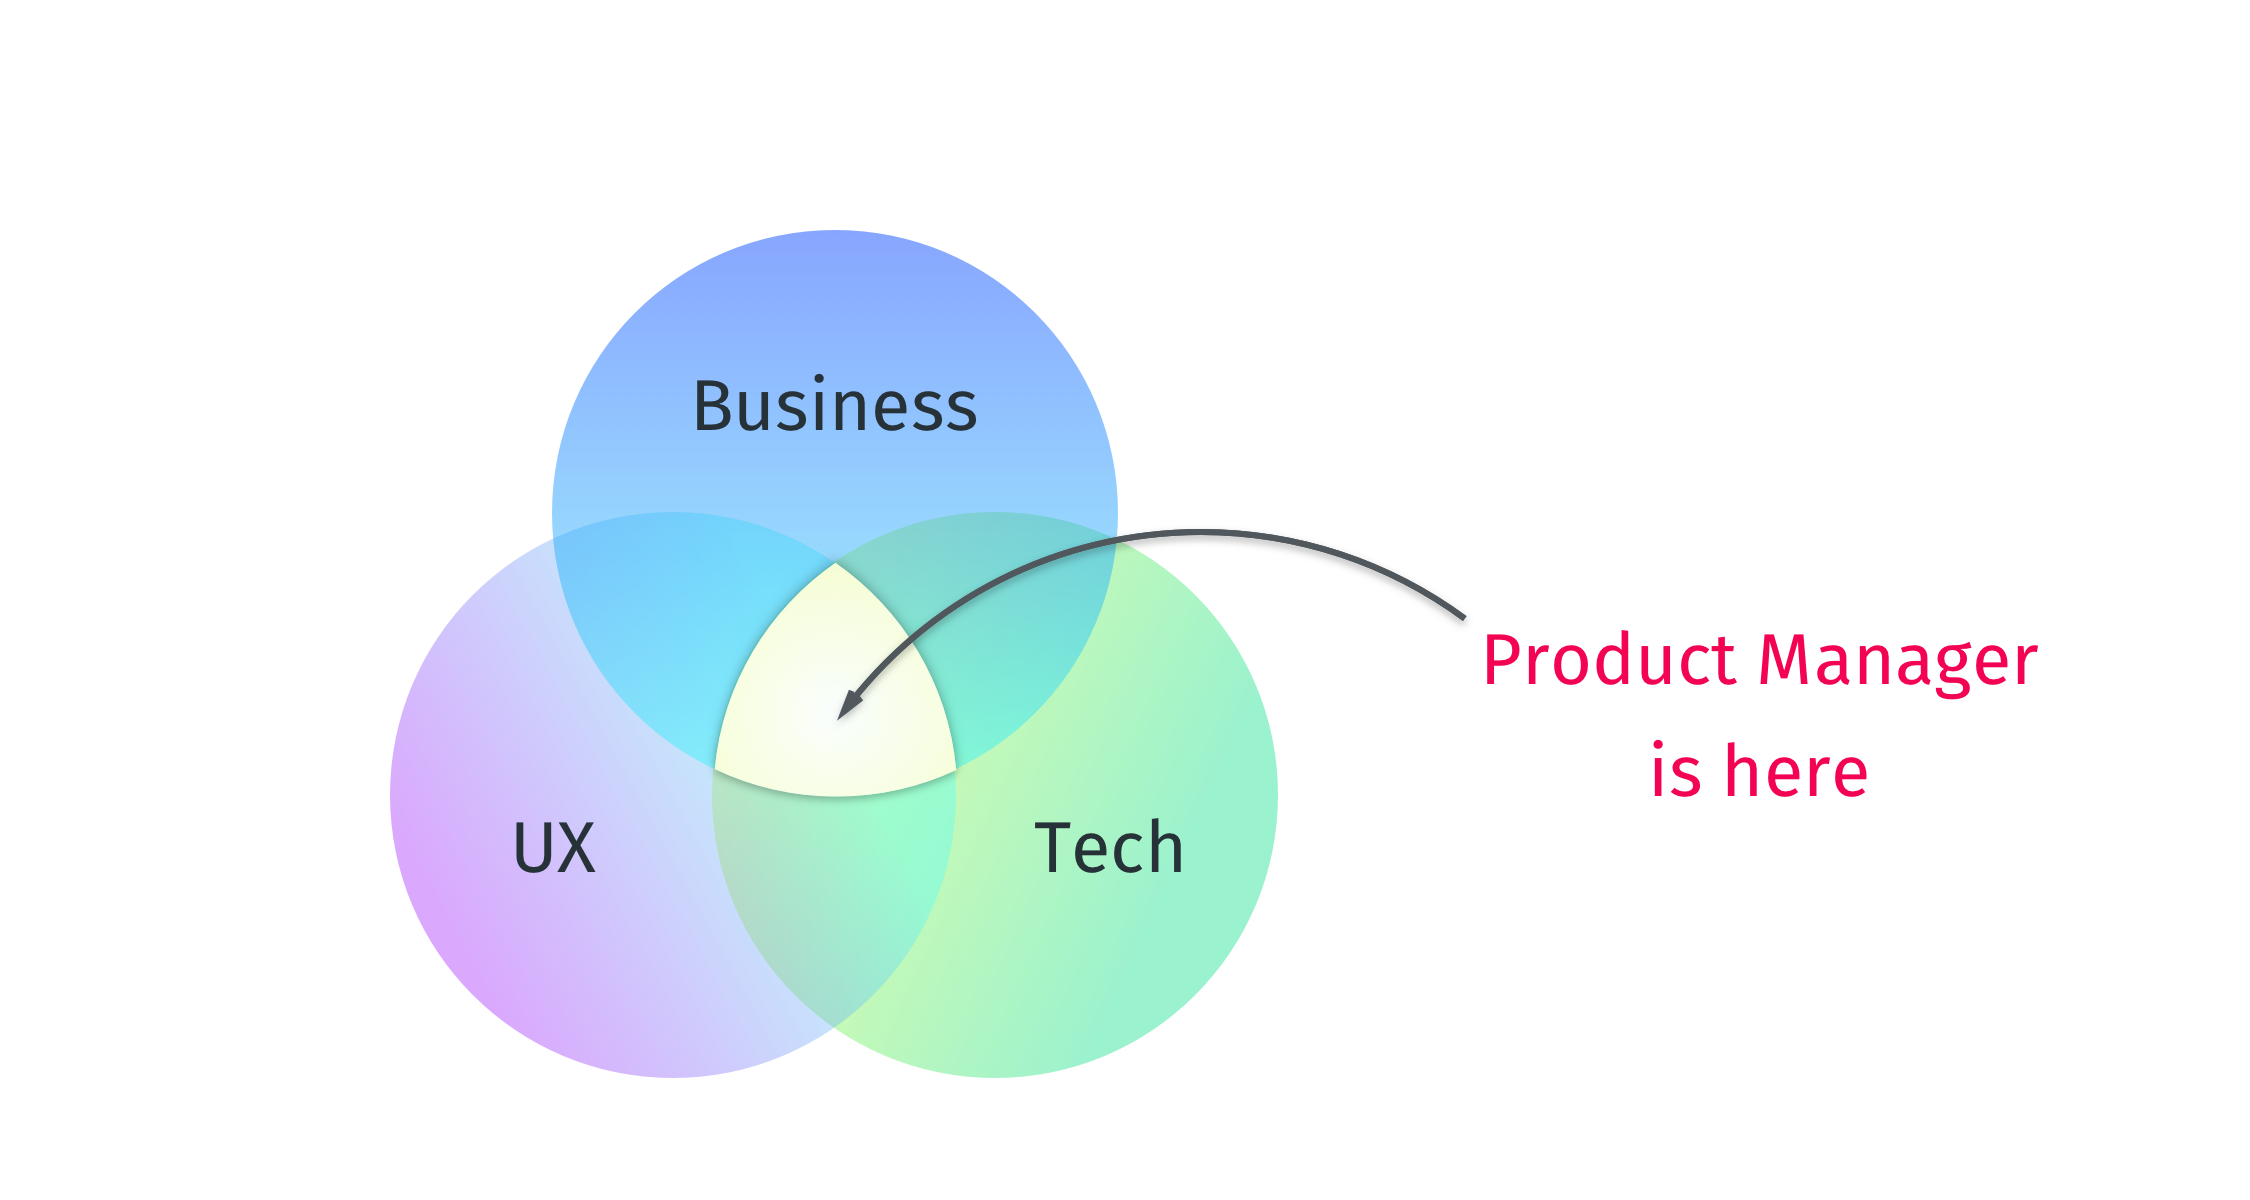 Product Manager is at the intersection of three circles: Technology, UI/UX and Business needs